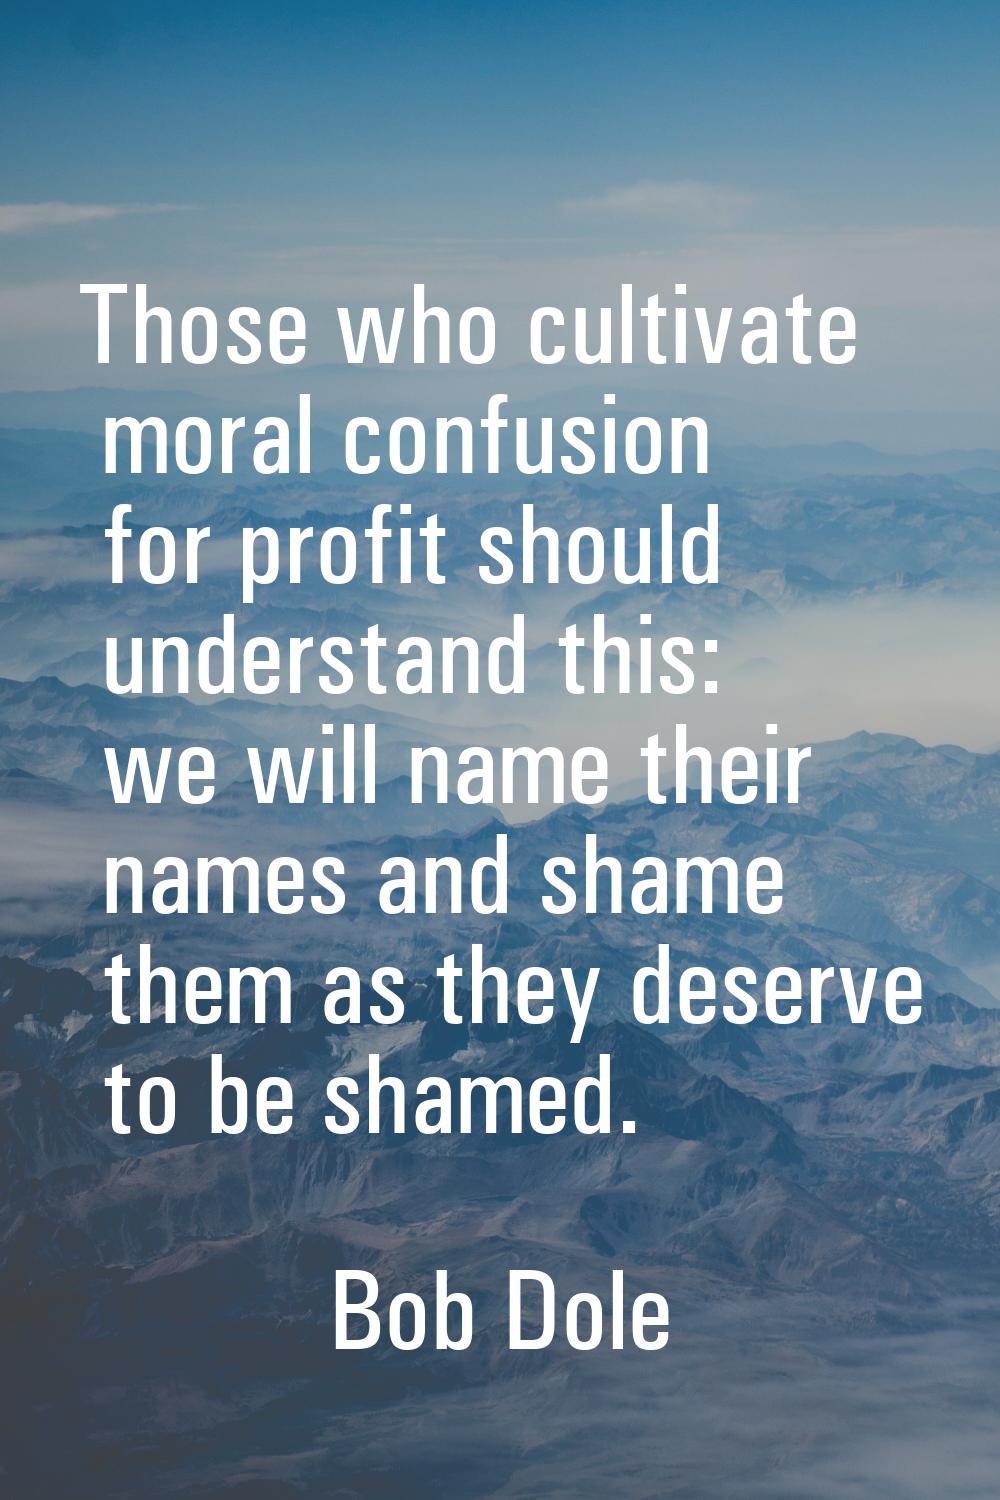 Those who cultivate moral confusion for profit should understand this: we will name their names and